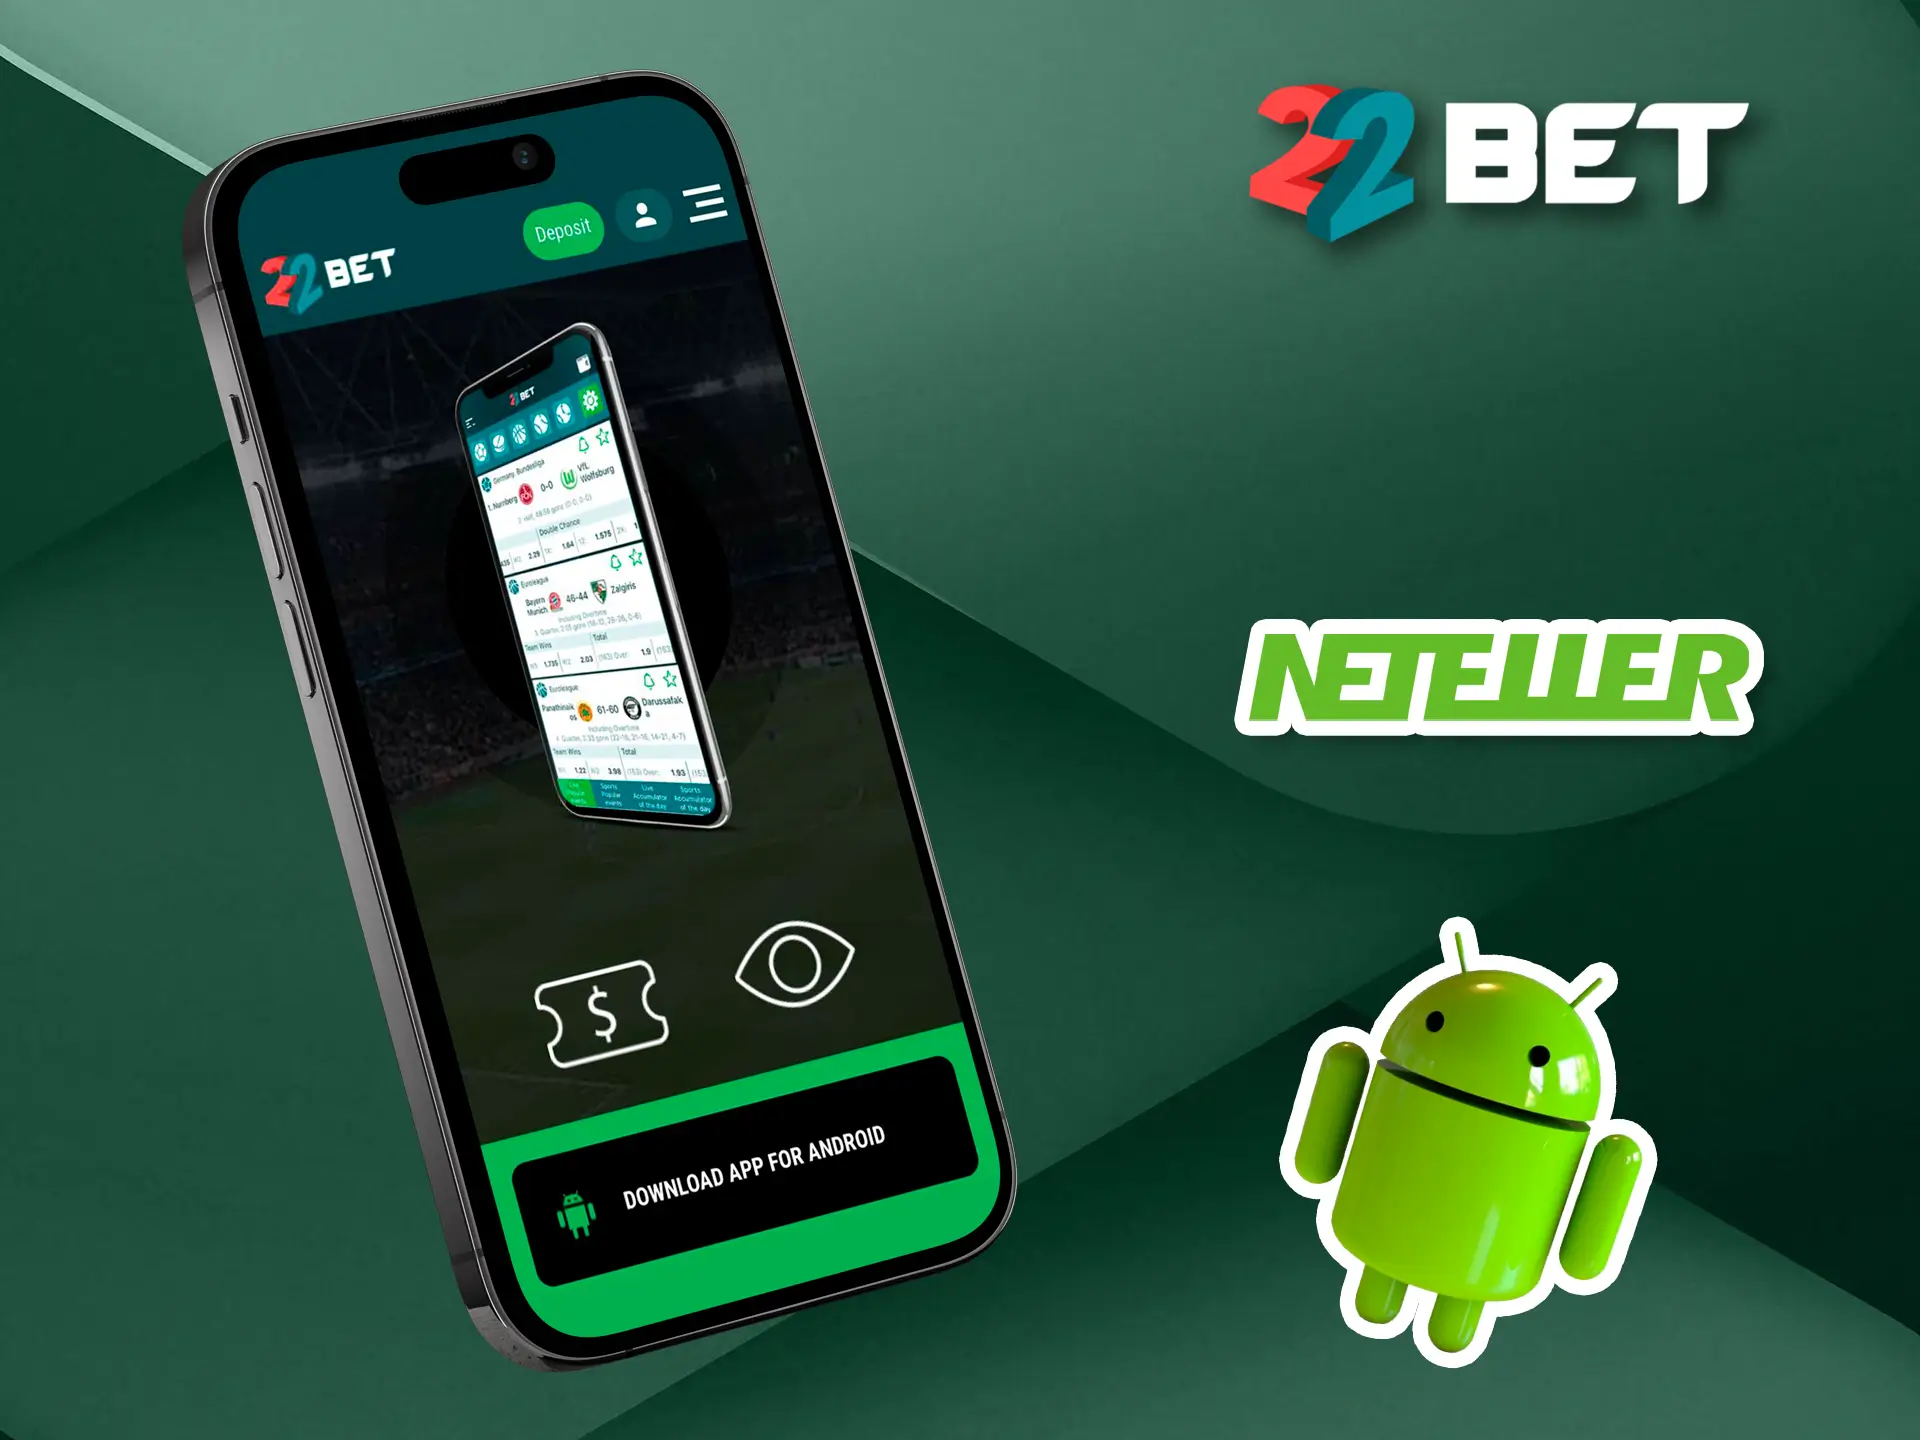 The 22Bet app is high quality and fast withdrawals via the Neteller platform.